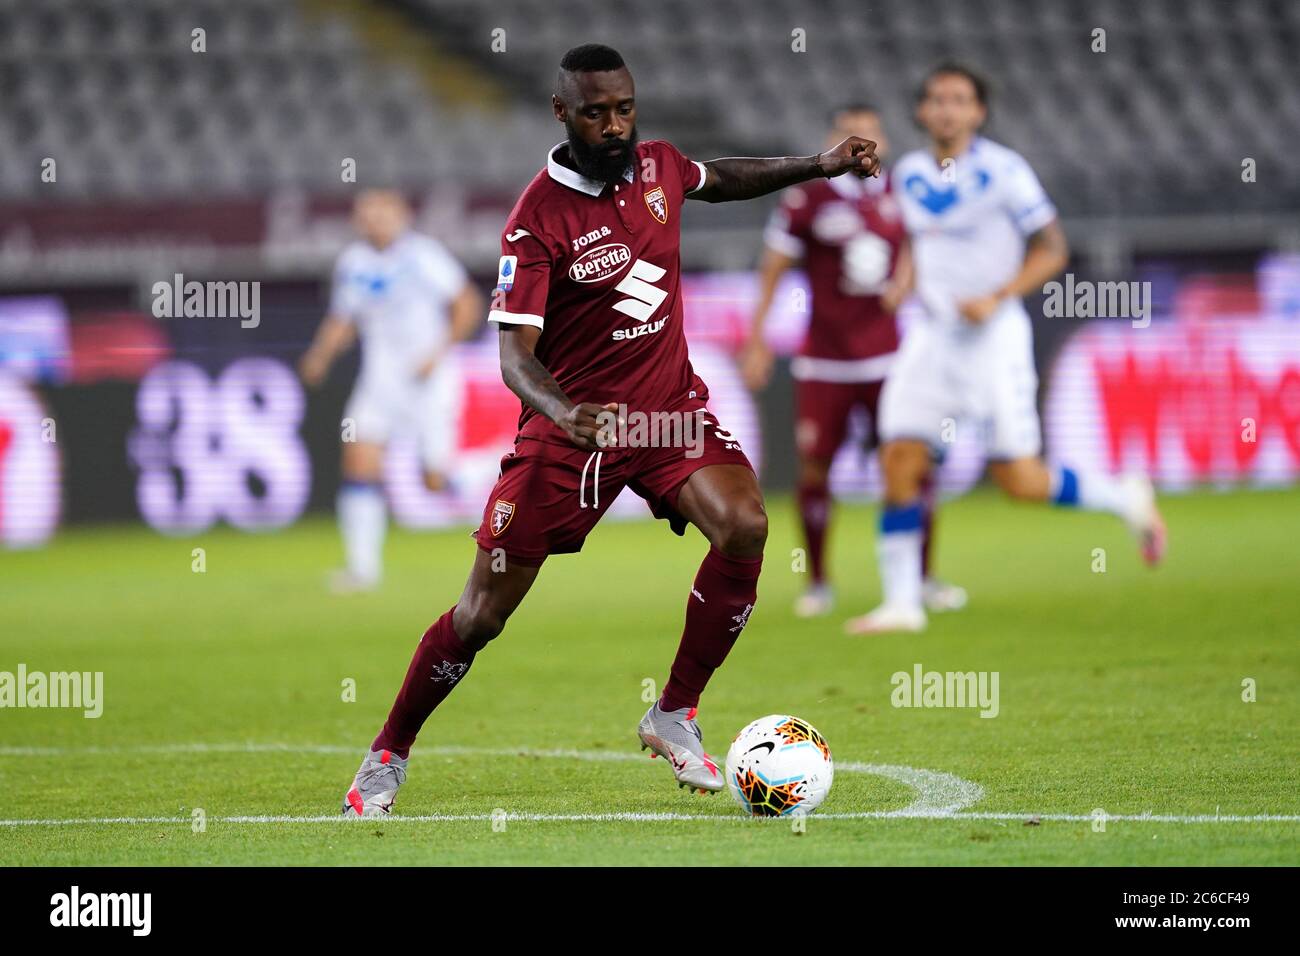 Torino (Italy) 08th June 2020. Italian Seria A. Nicolas N'Koulou of Torino FC in action   during the the Serie A match  between Torino Fc and Brescia Calcio.  Torino Fc wins 3-1 over Brescia Calcio. Credit: Marco Canoniero/Alamy Live News Stock Photo